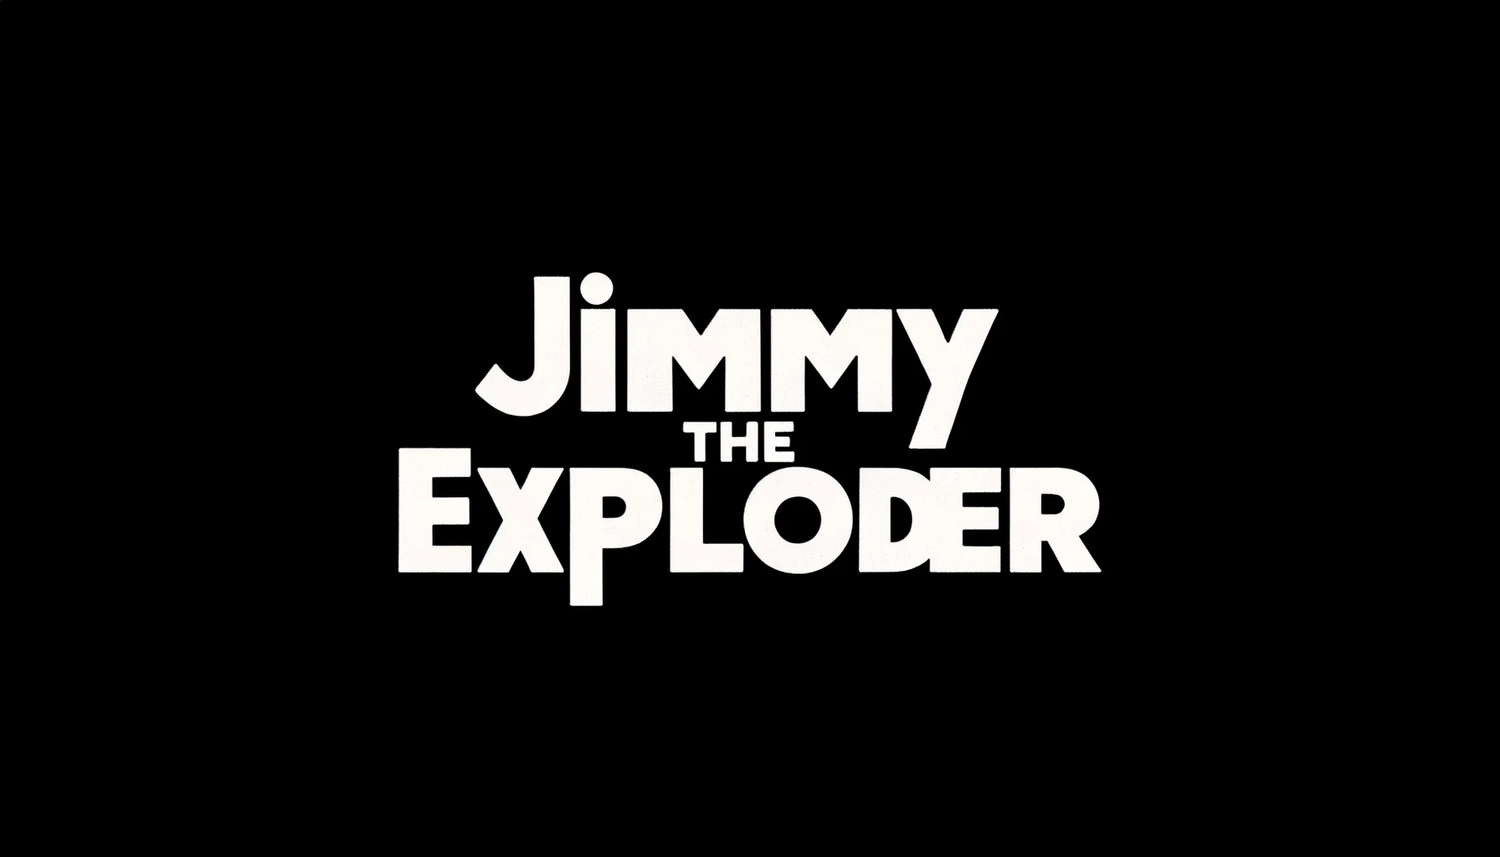 Jimmy The Exploder